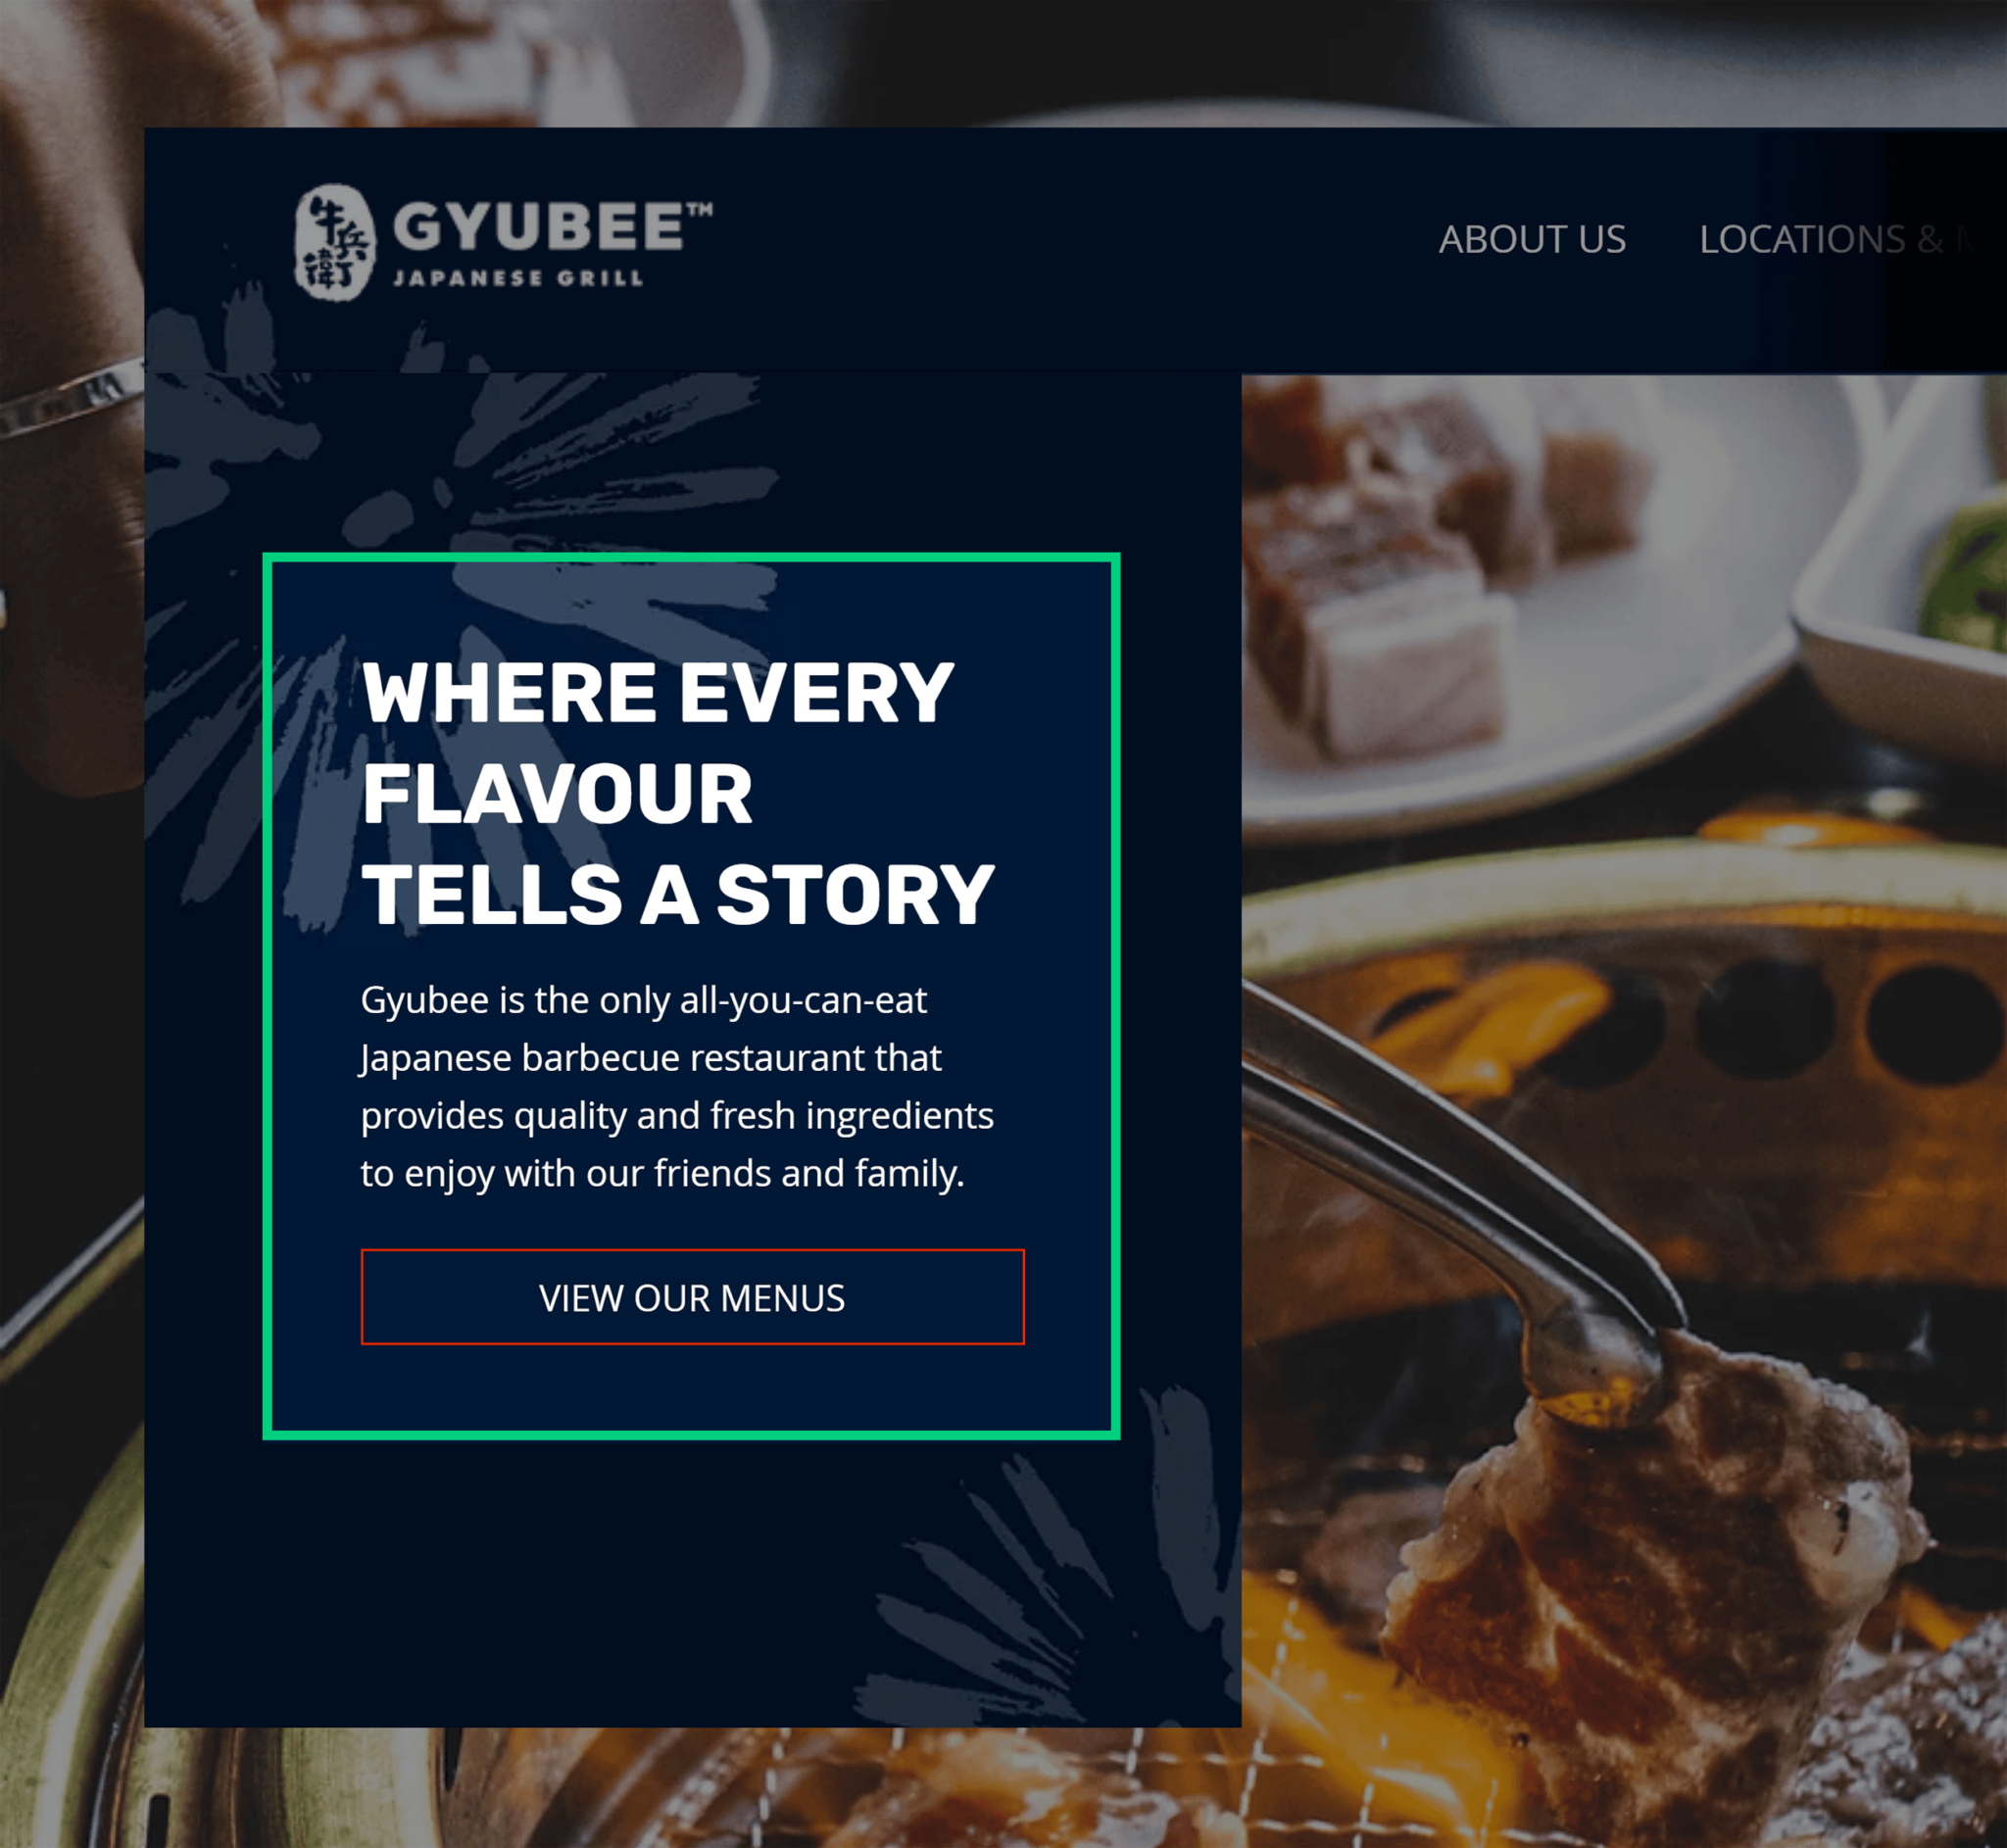 gyubee-japanese-grill-message Small Business Marketing: 6 Proven Strategies for More Reach